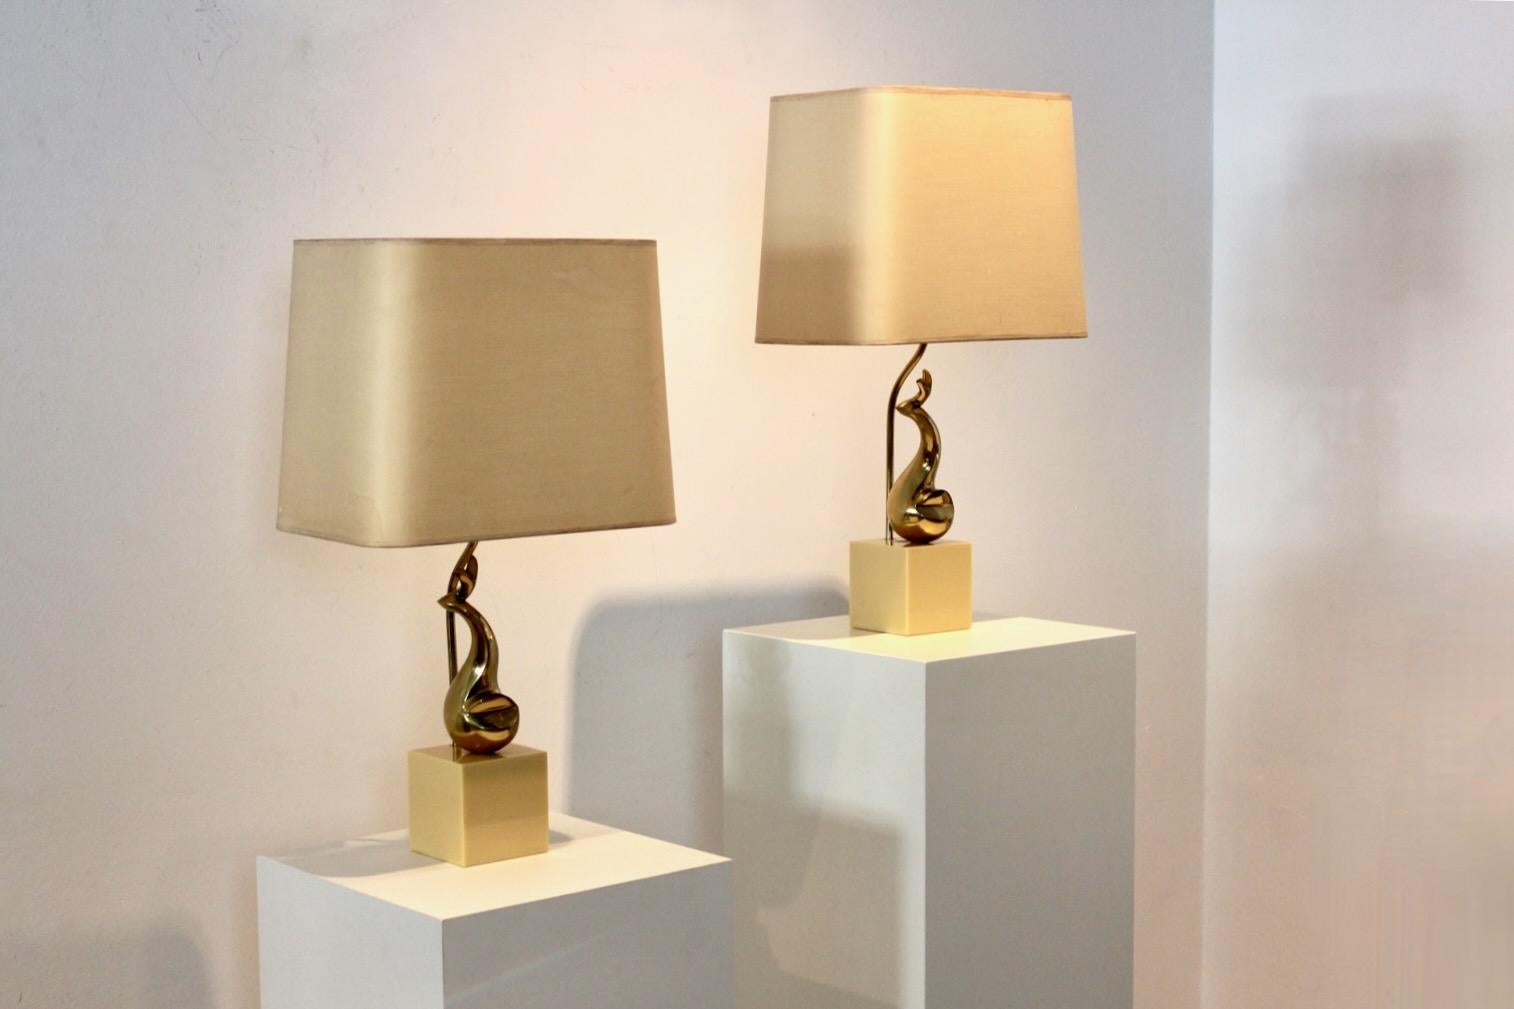 Pair of Exclusive Philippe-Jean Brass Art Sculpture Table Lamps, Signed For Sale 3